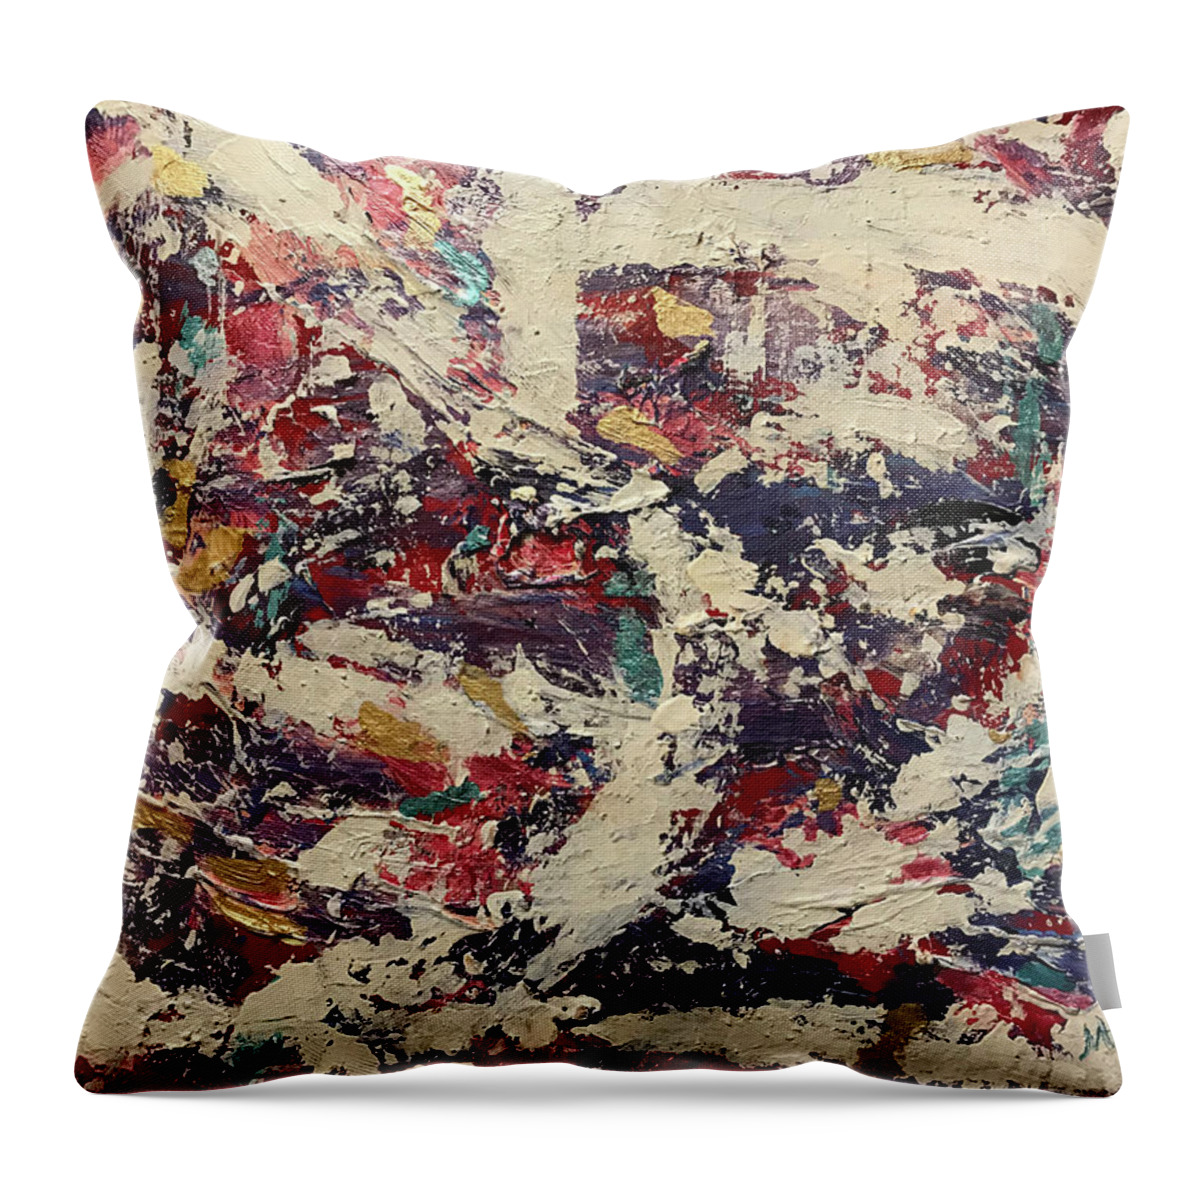 Carnaval Throw Pillow featuring the painting Carnaval Foyalais by Medge Jaspan